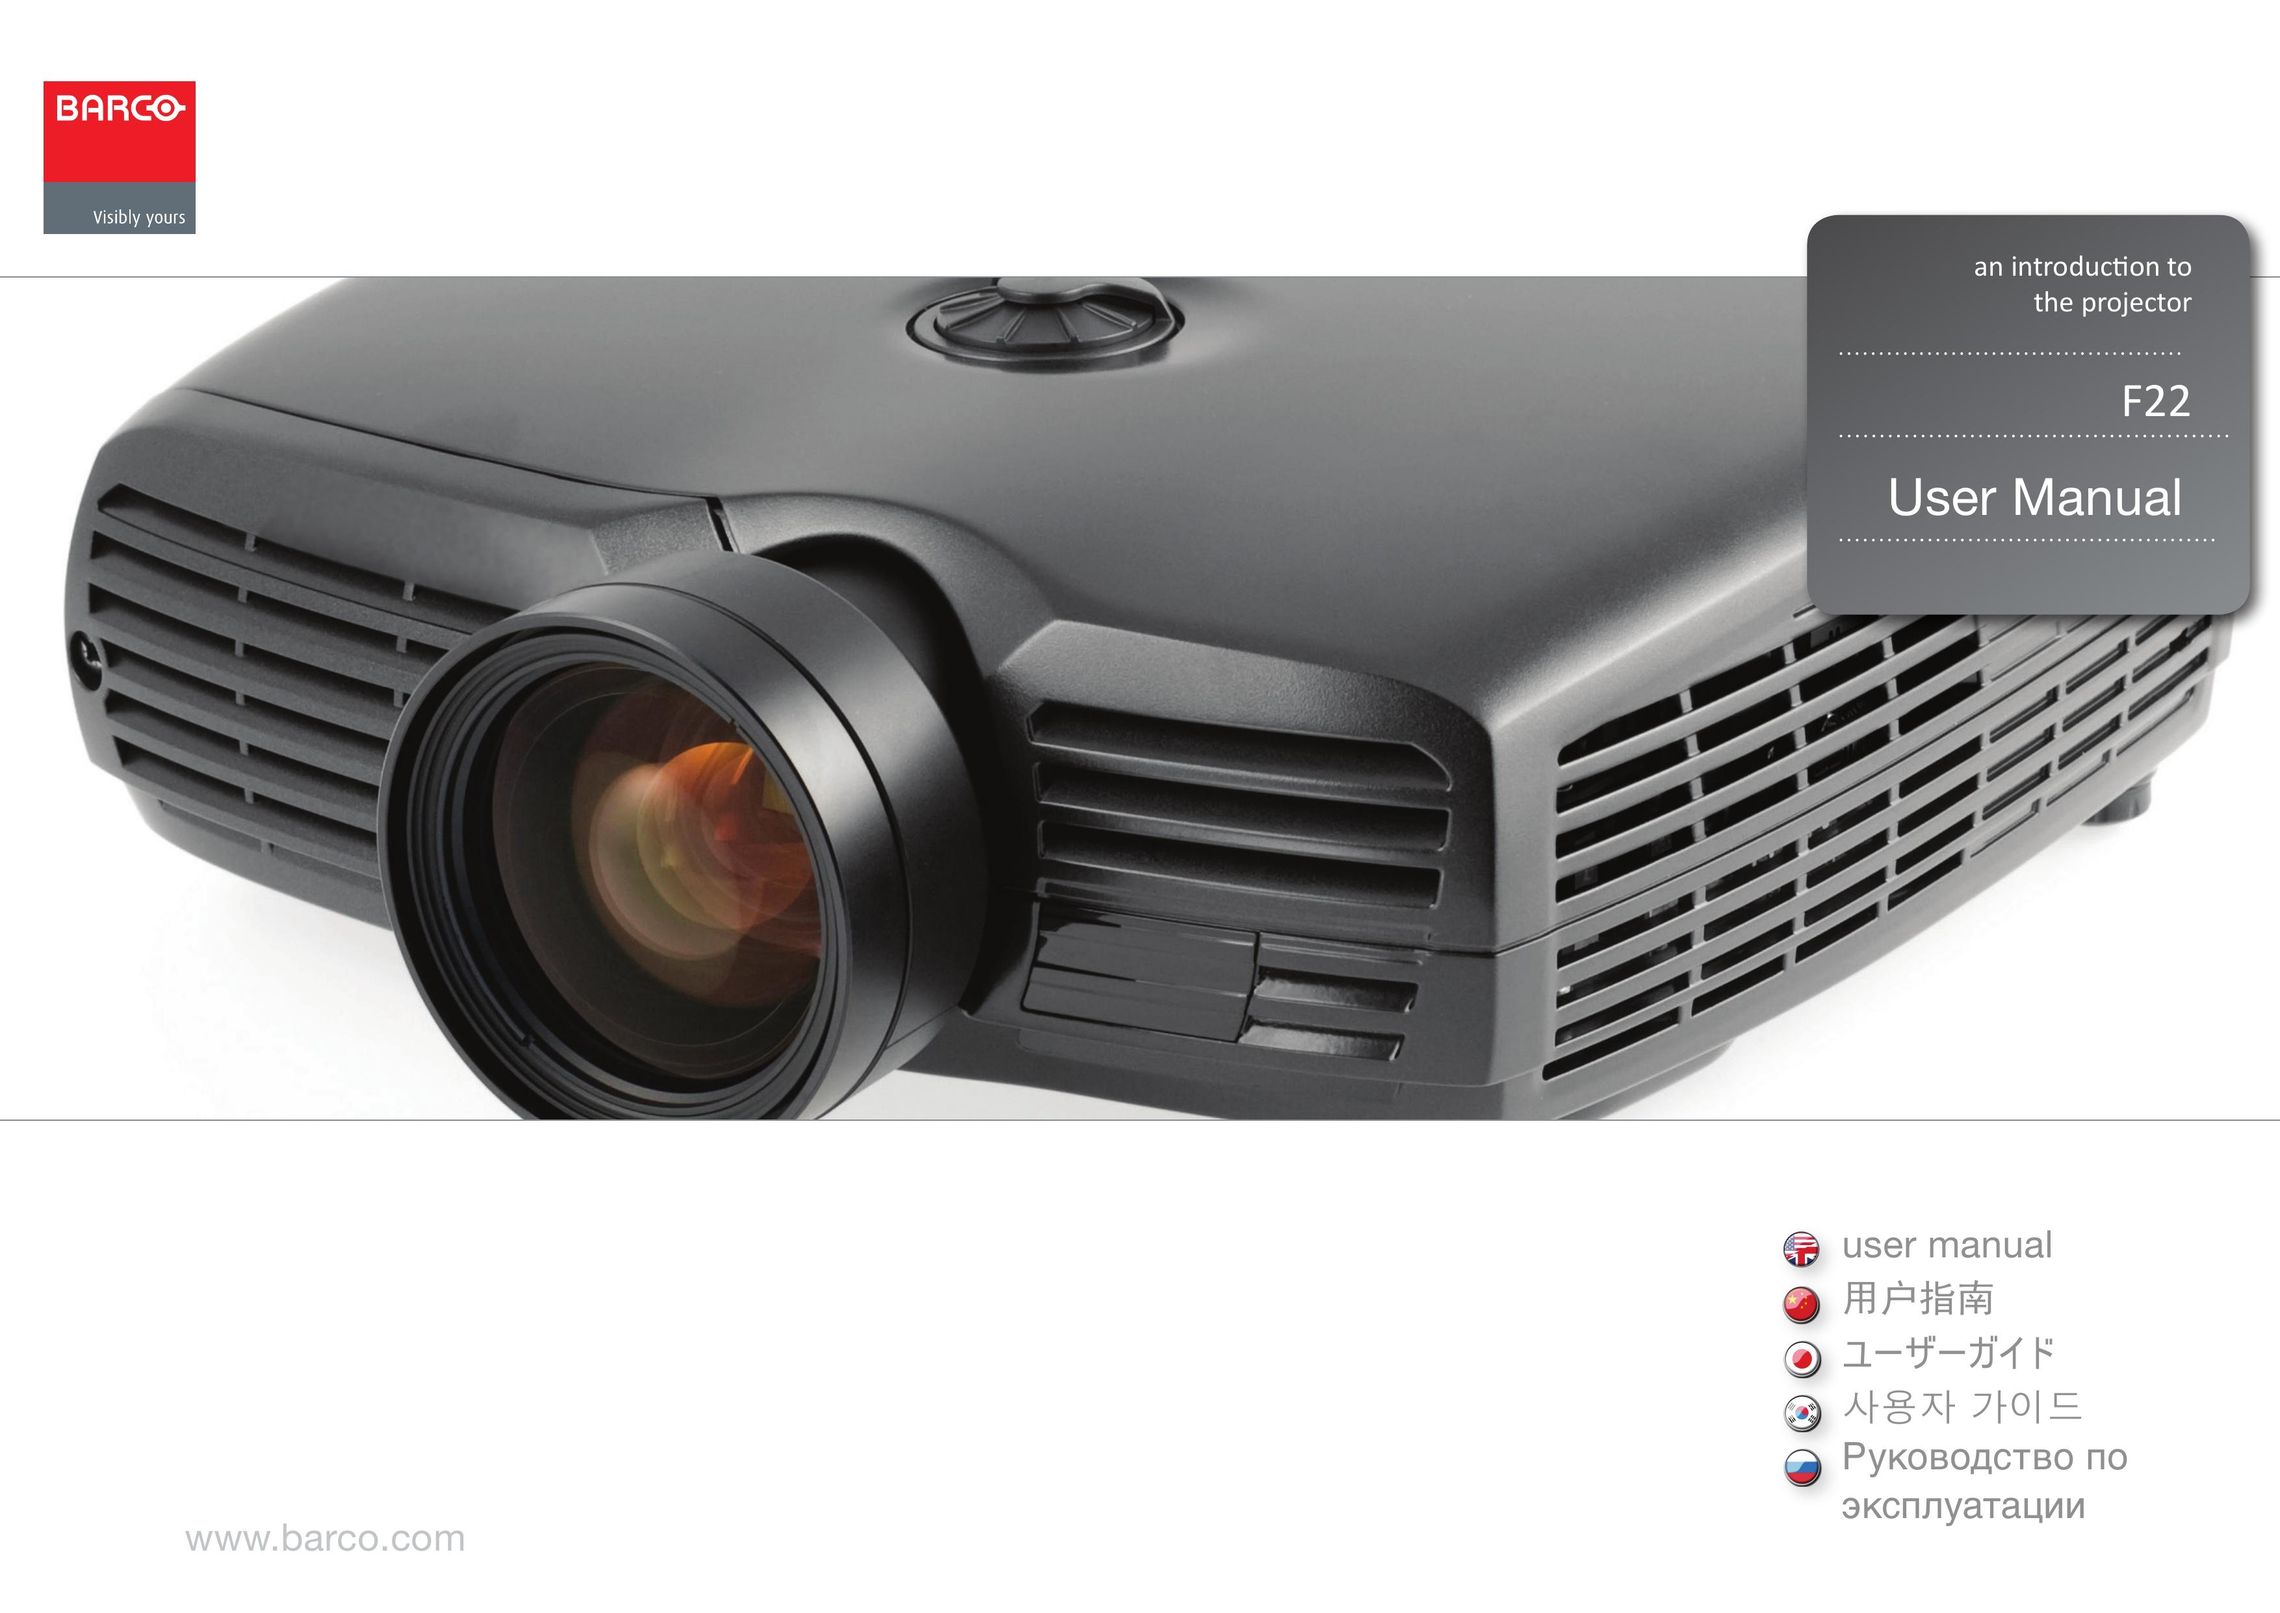 Barco F22 Projector User Manual